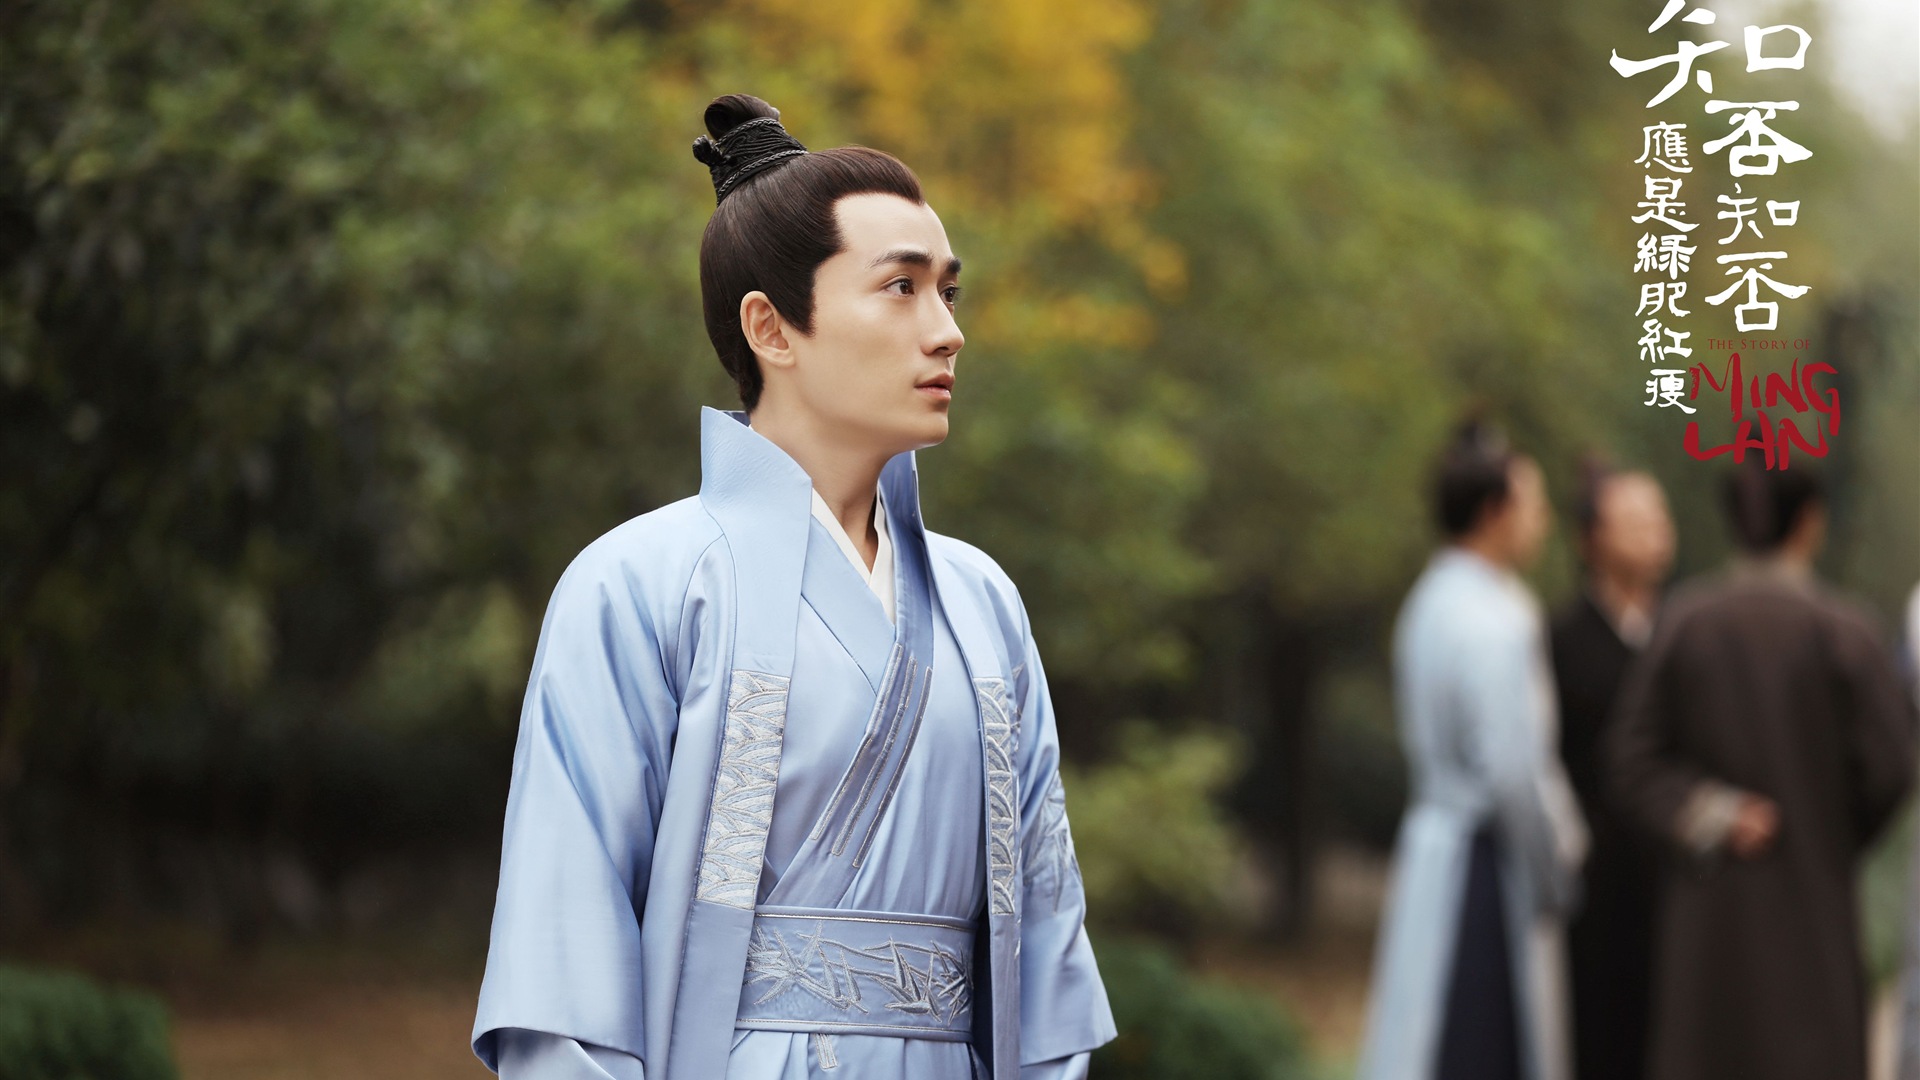 The Story Of MingLan, TV series HD wallpapers #55 - 1920x1080